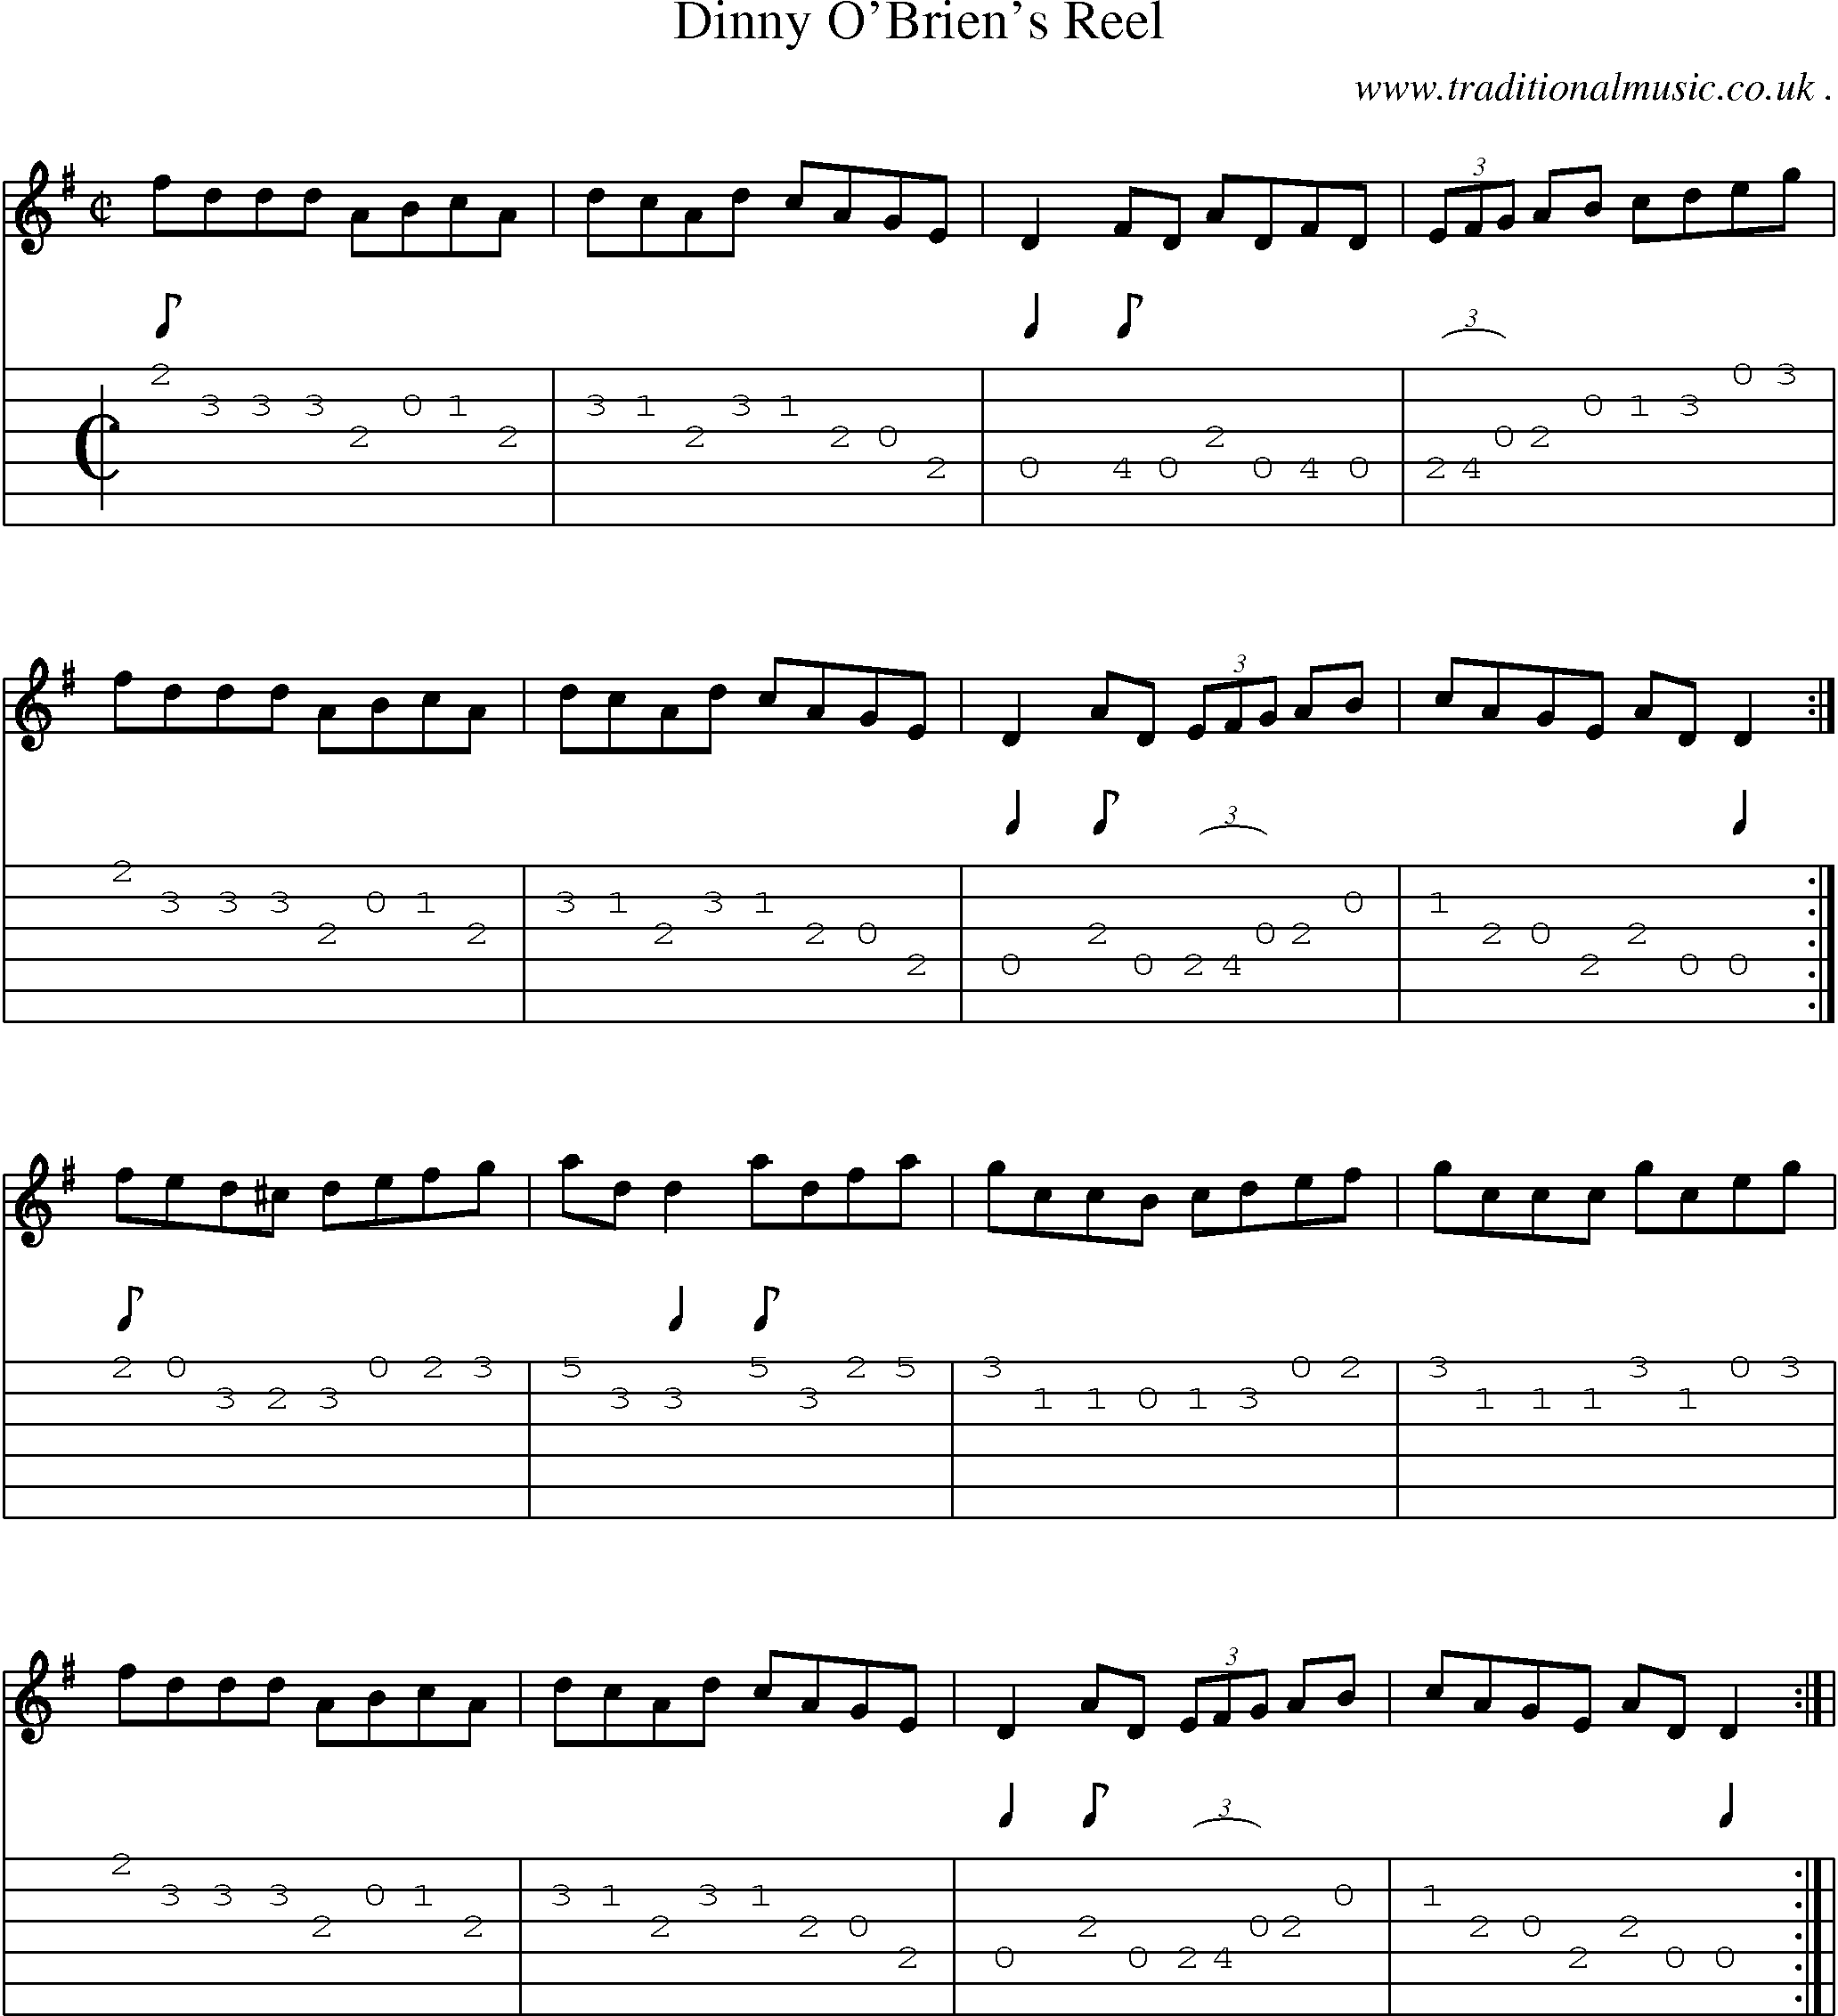 Sheet-Music and Guitar Tabs for Dinny Obriens Reel